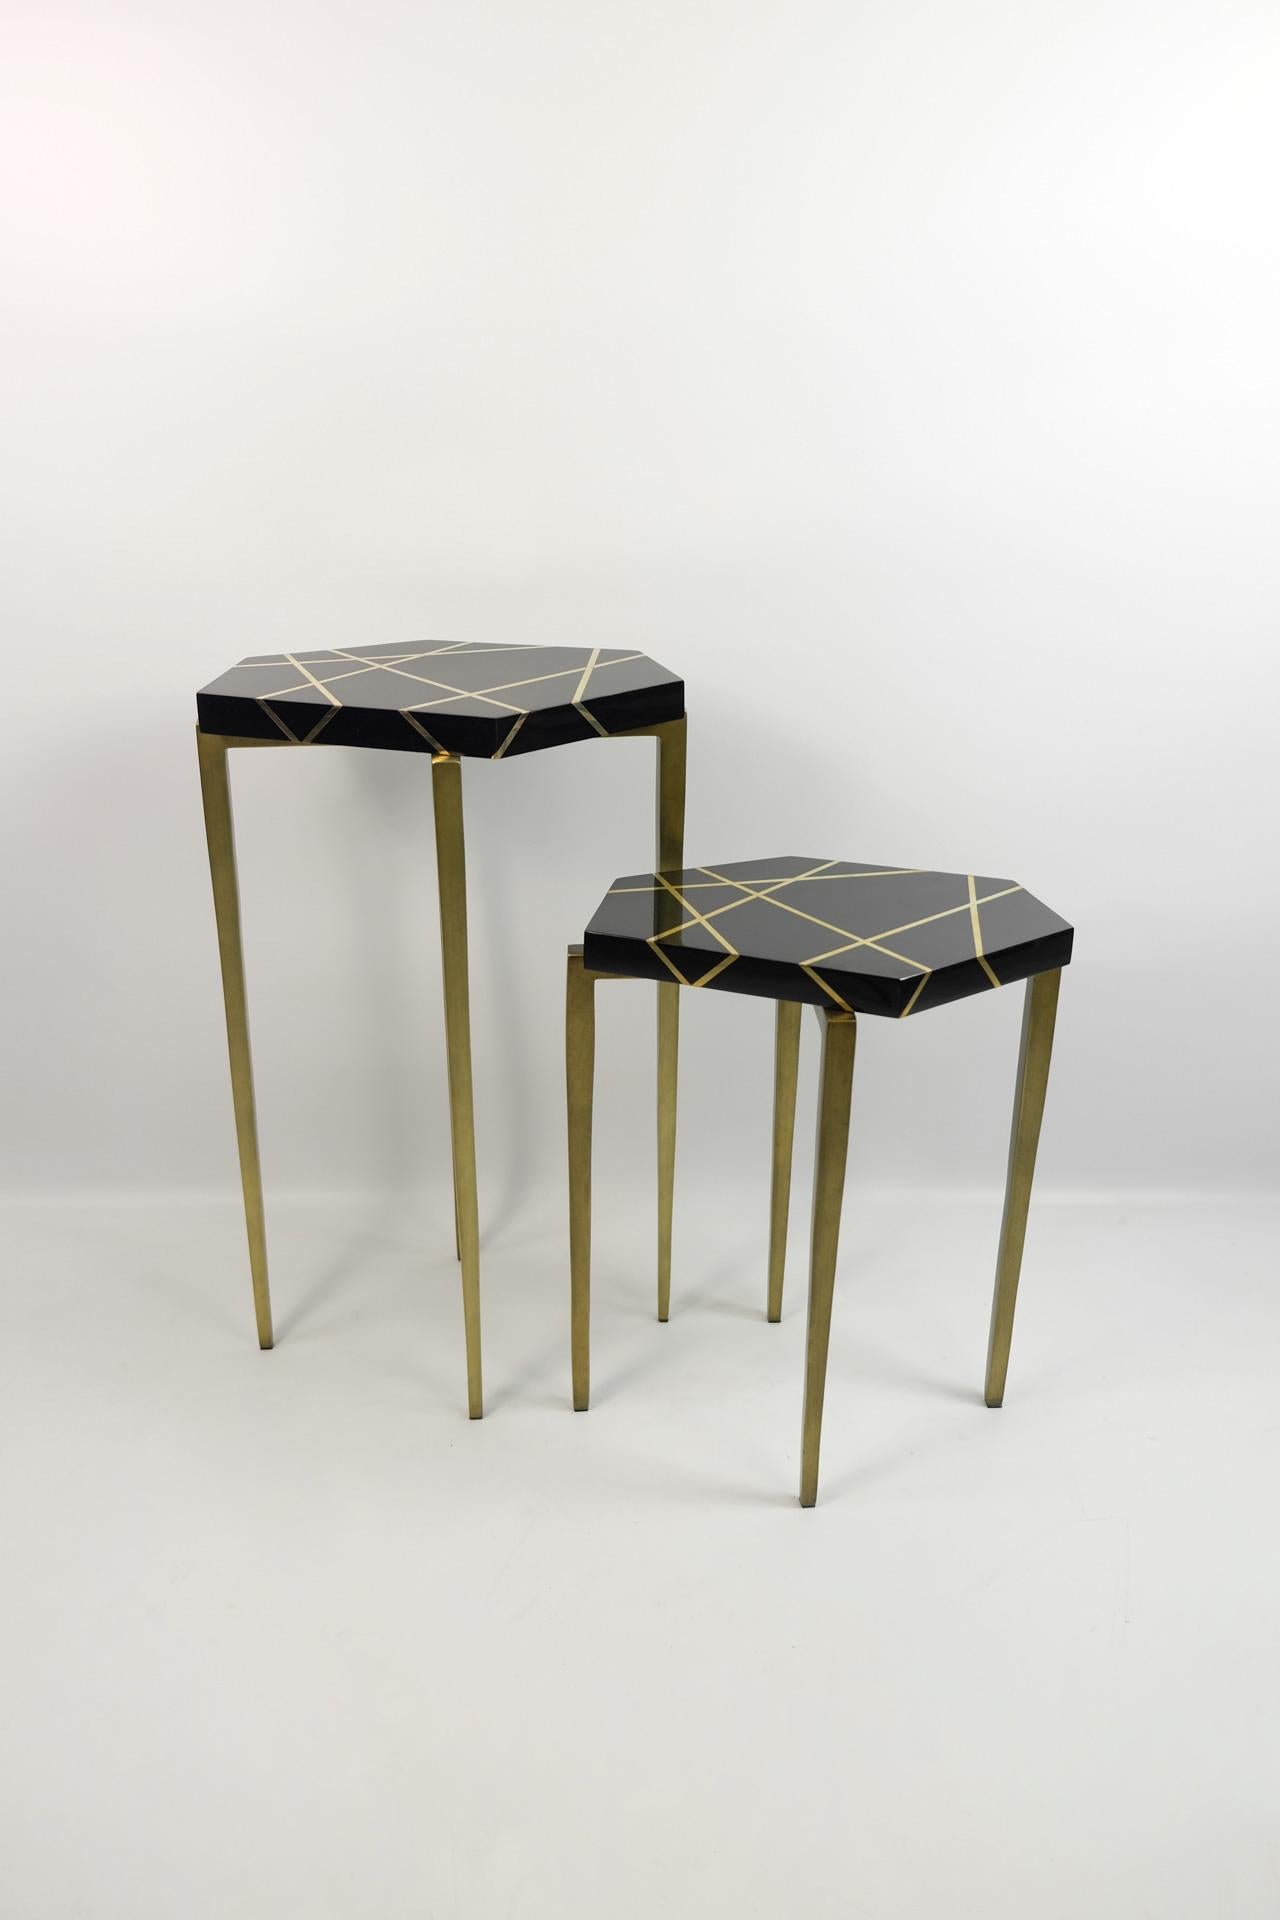 Futurist Set of Polygonal Side Tables in Black Marquetry and Brass by Ginger Brown